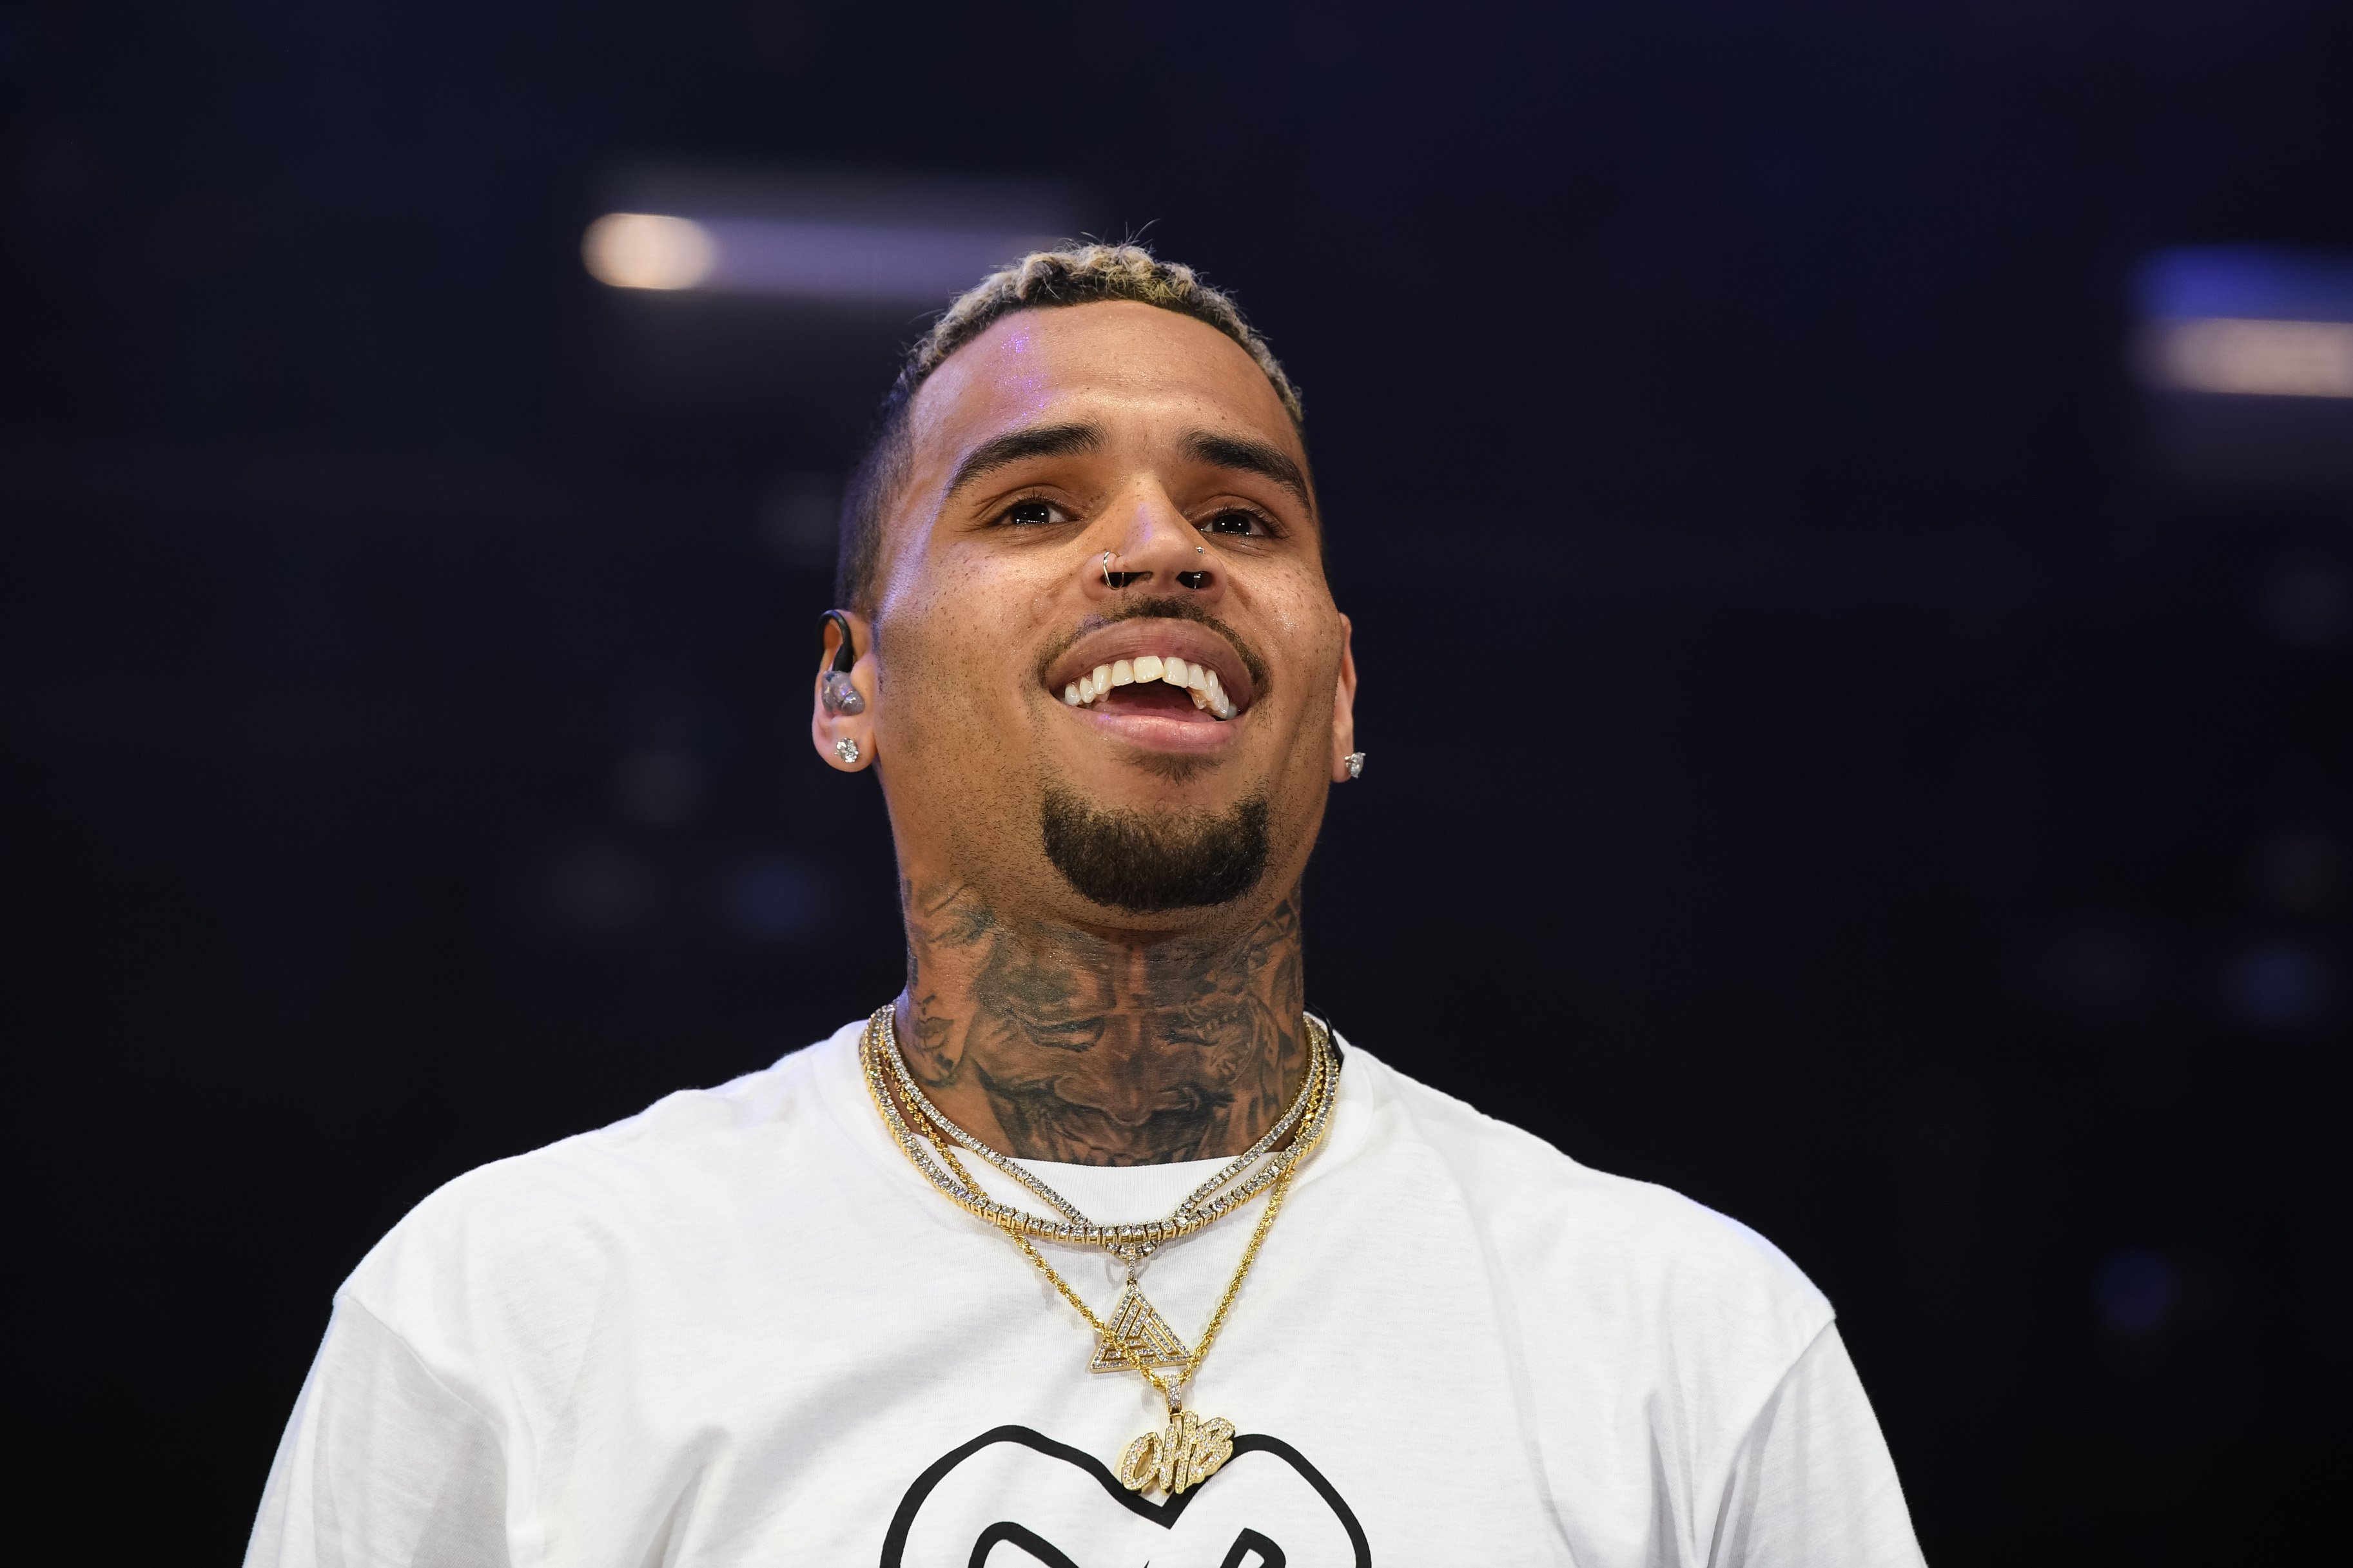 Chris Brown at HOT 97 Summer Jam 2017 at MetLife Stadium on June 11, 2017 in East Rutherford, New Jersey.|Source: Getty Images